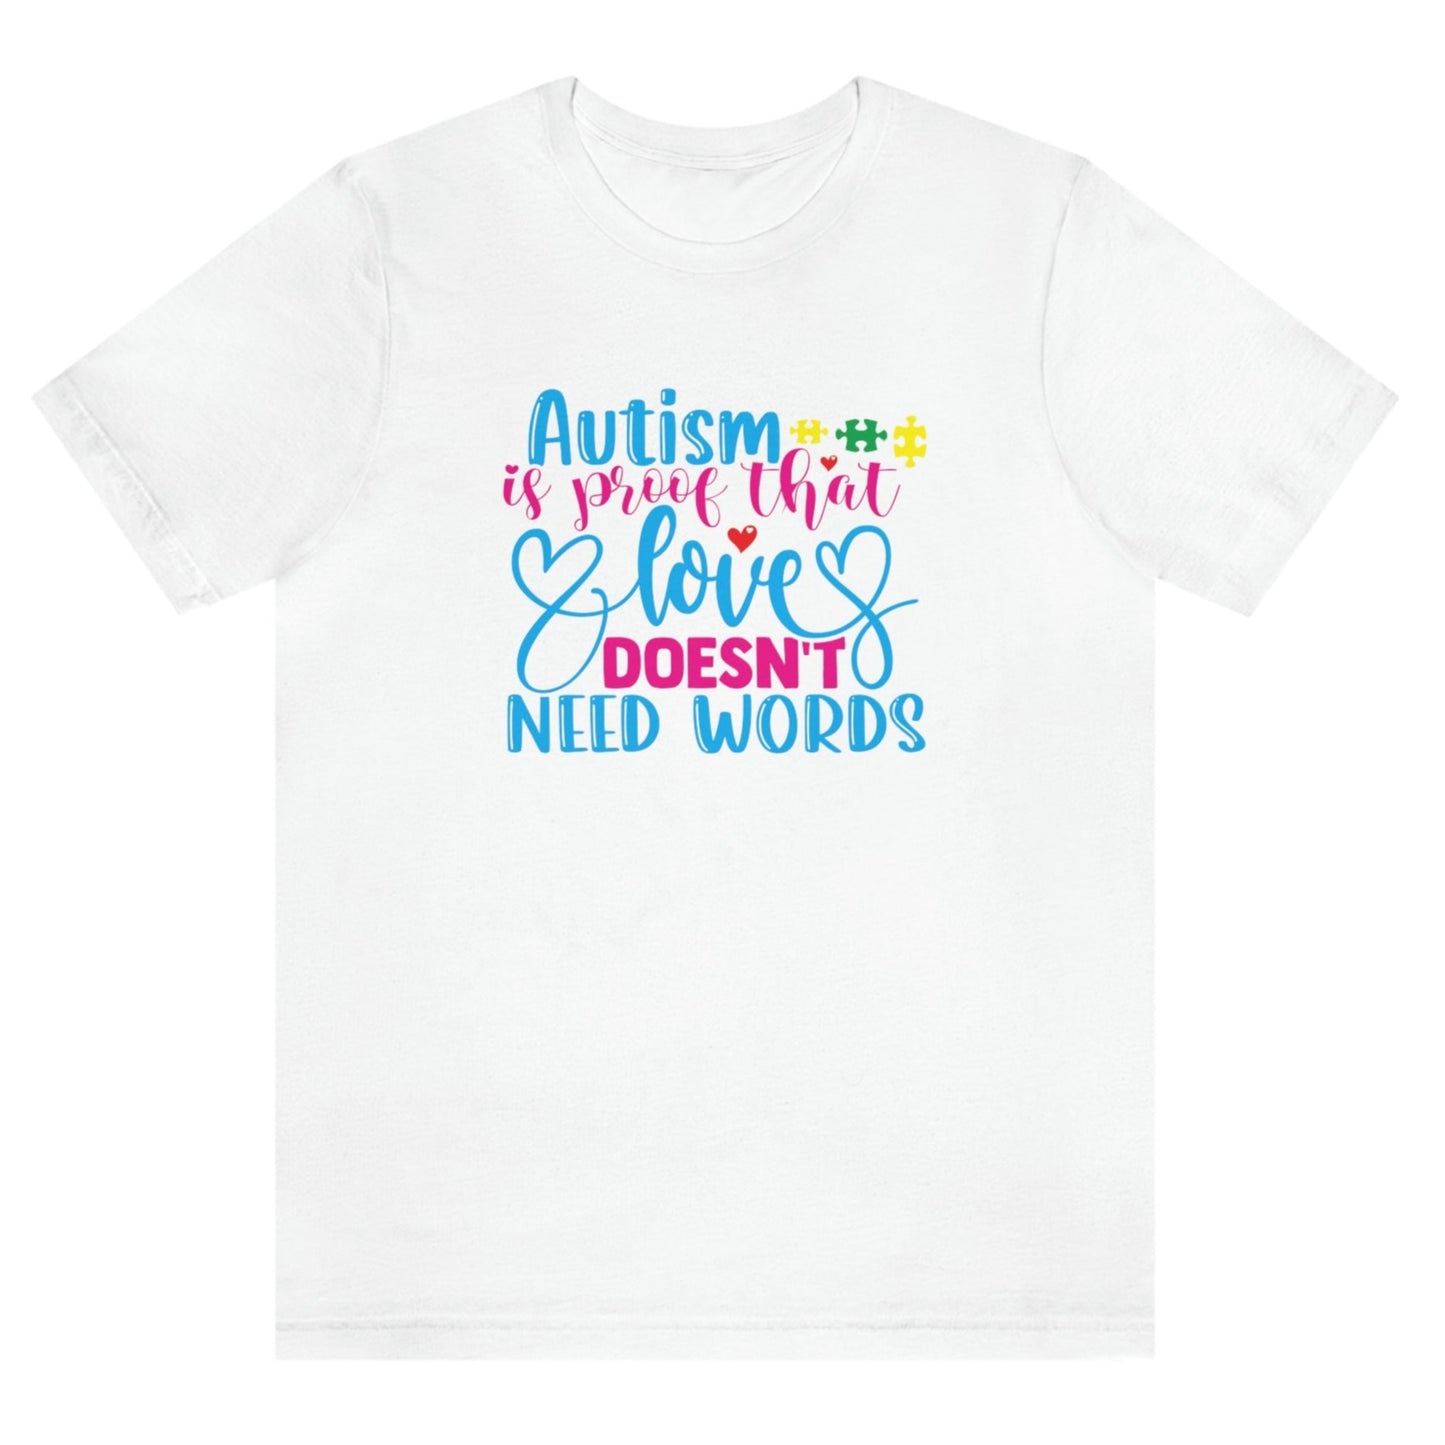 autism-is-proof-that-love-doesnt-need-words-white-t-shirt-awareness